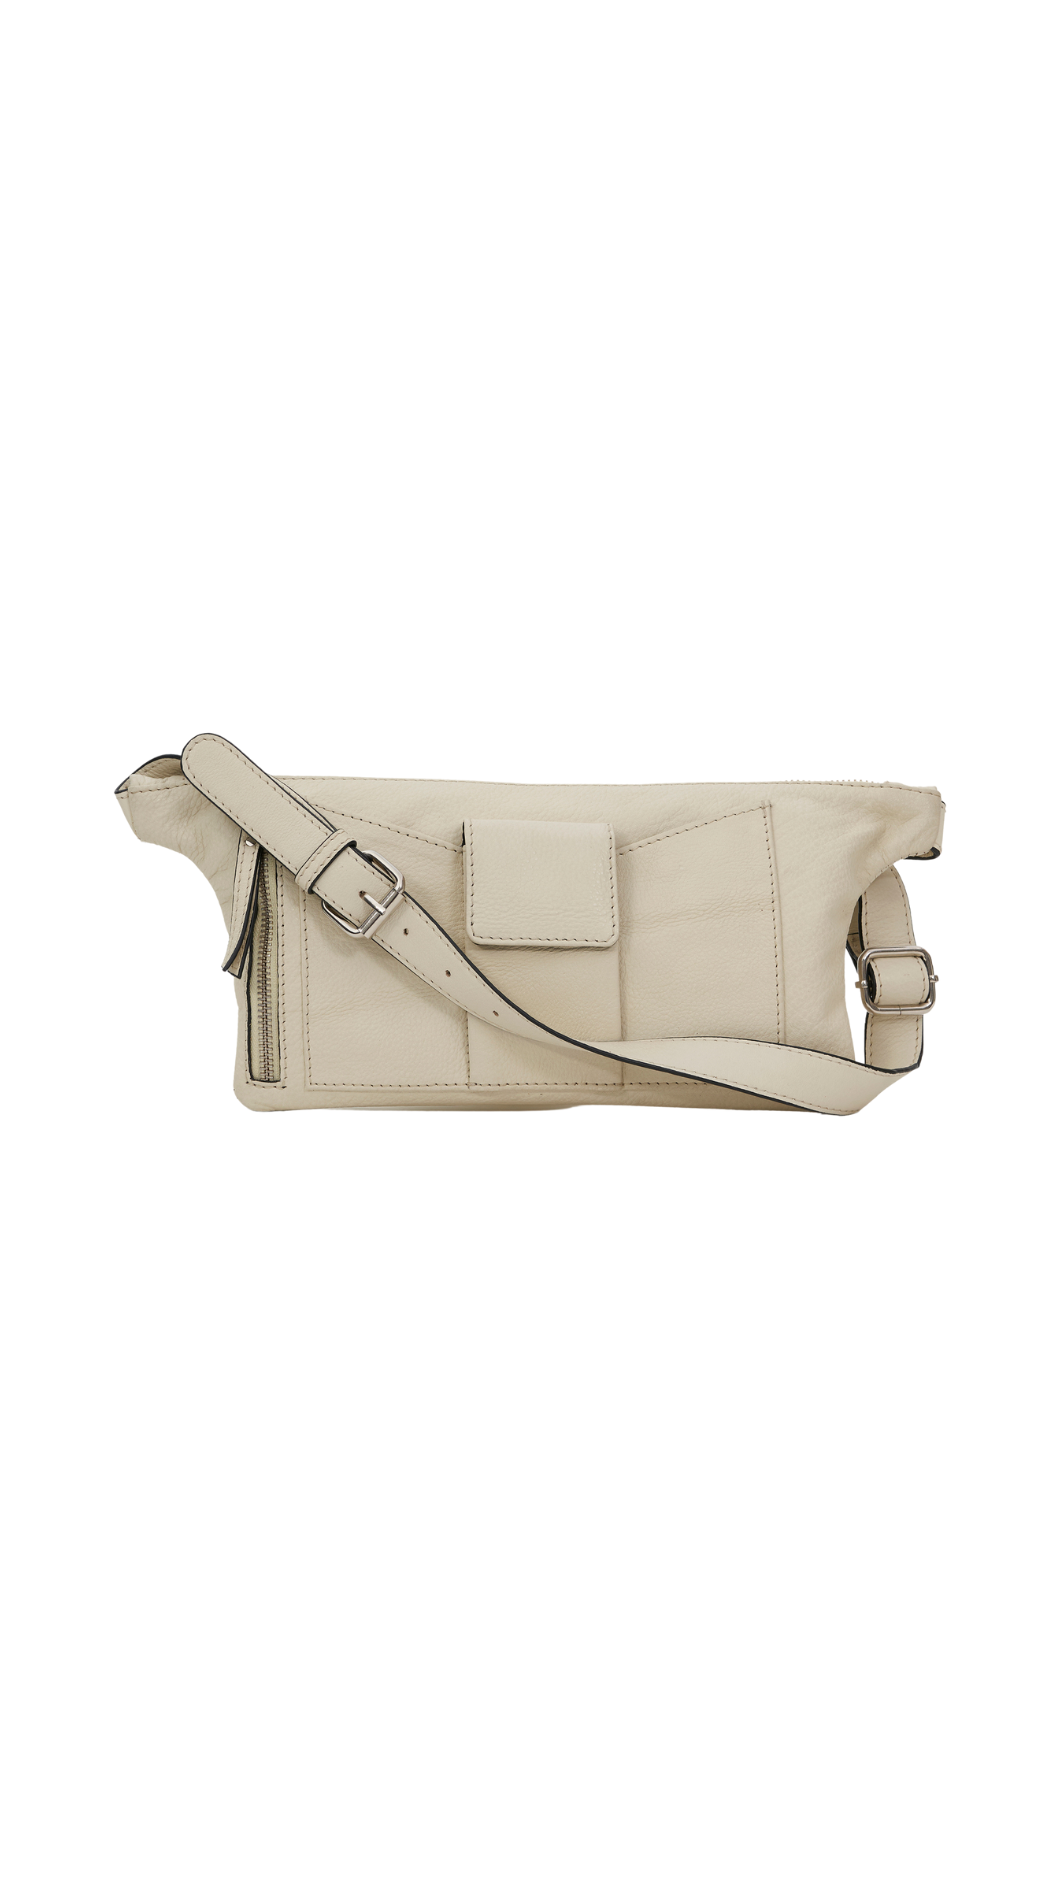 Urban Explorer Belt Bag in White ( Adjustable Crossbody Handle), a product by Mistry 